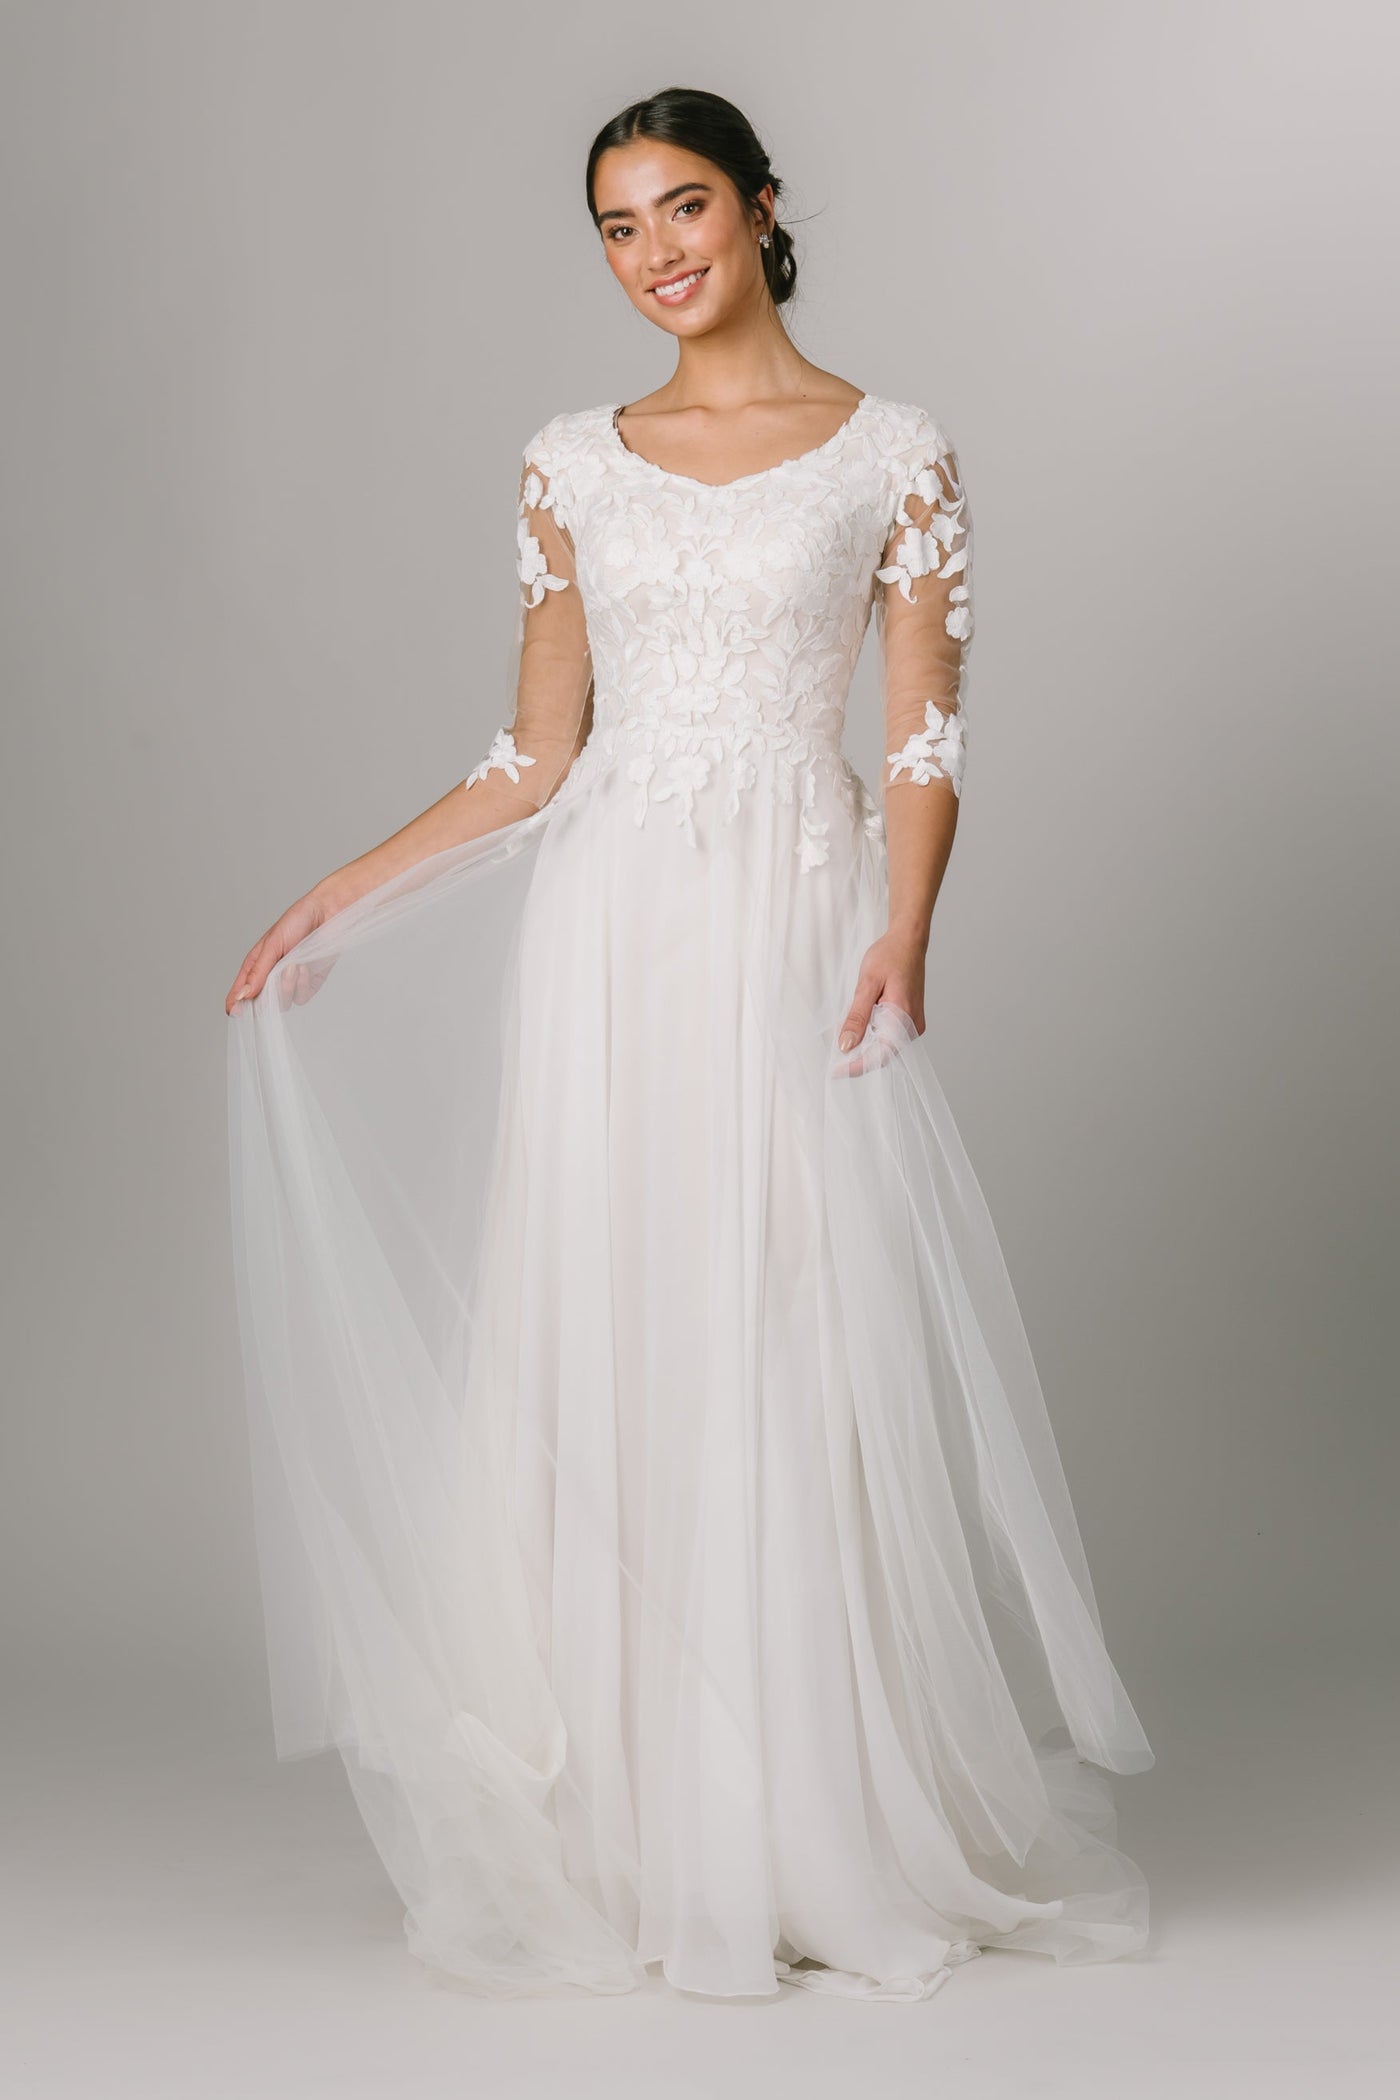 This Modest Wedding Dress features illusion sleeves, a soft V-neckline and an A-line skirt. - Modest Wedding Dresses - Modest Dresses - Modest Clothing - LatterDayBride